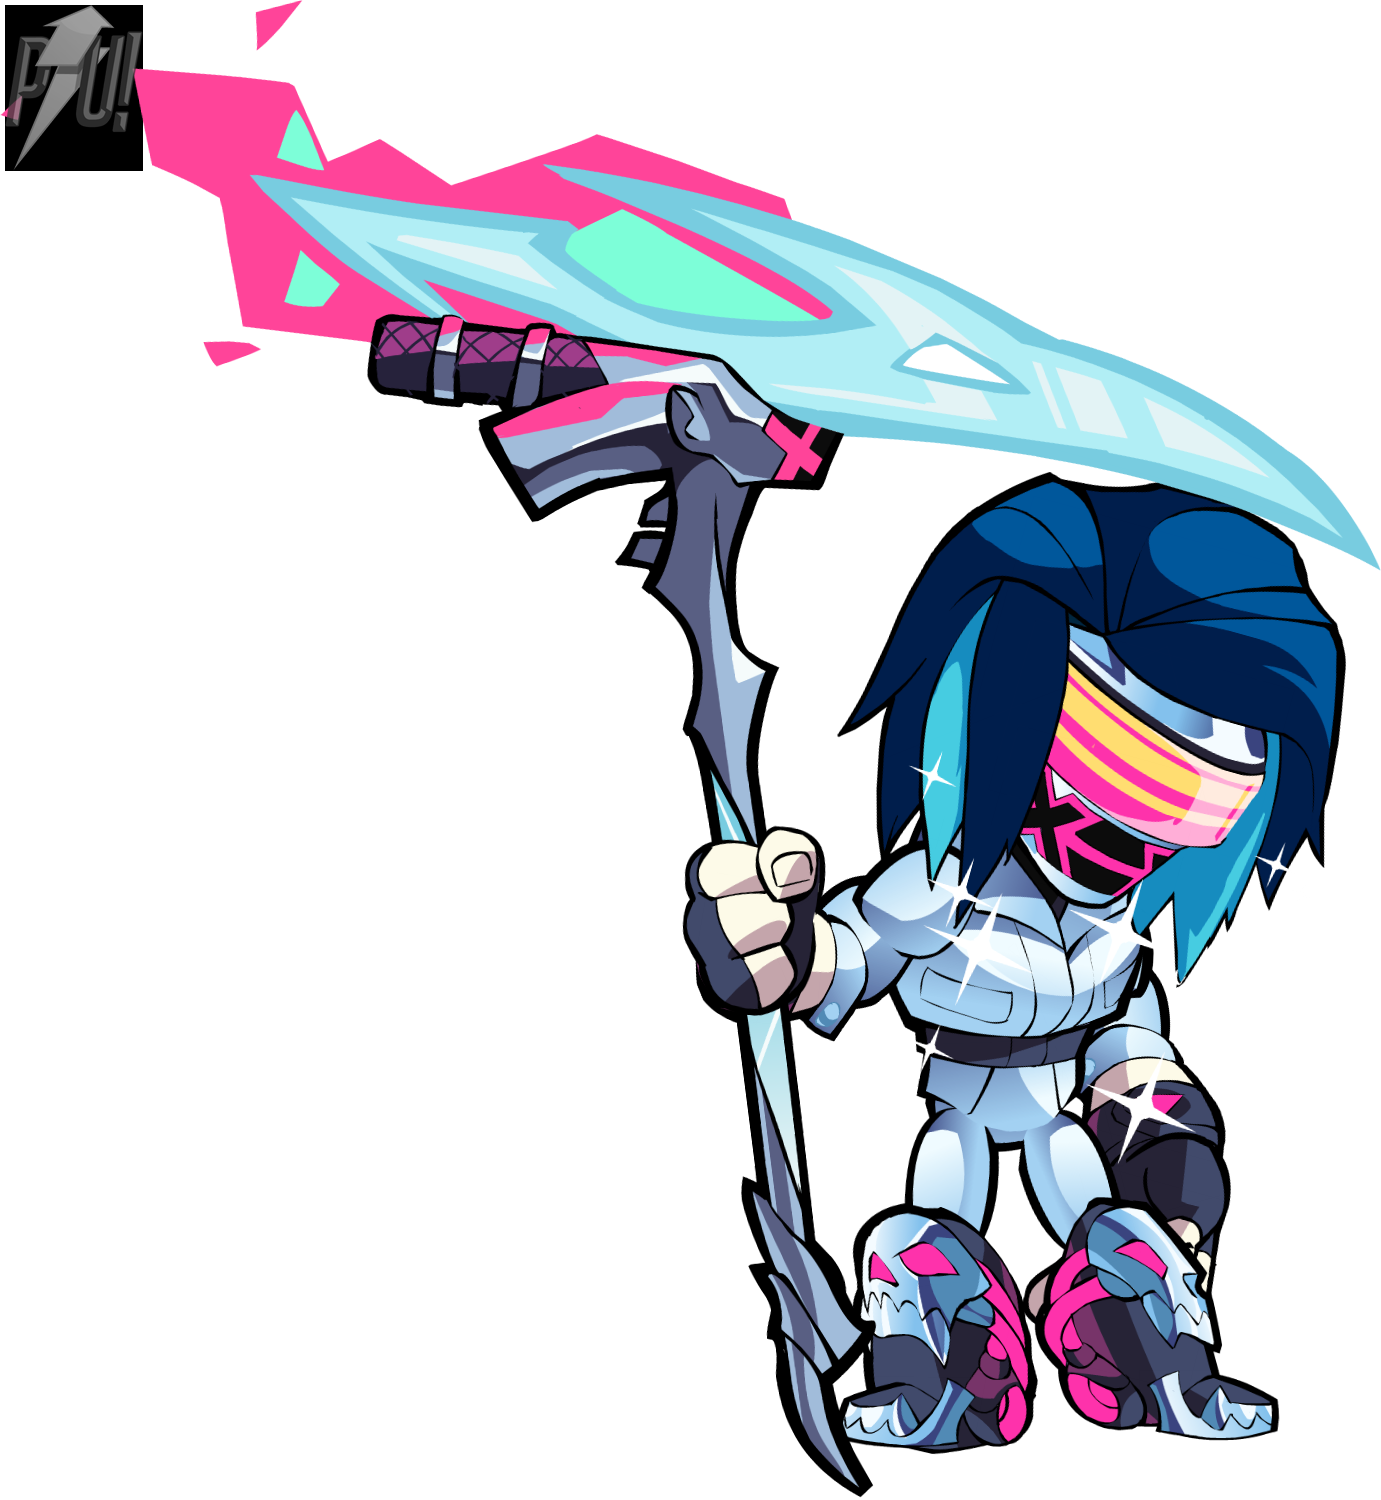 Synthwave Brawlhalla Wallpapers